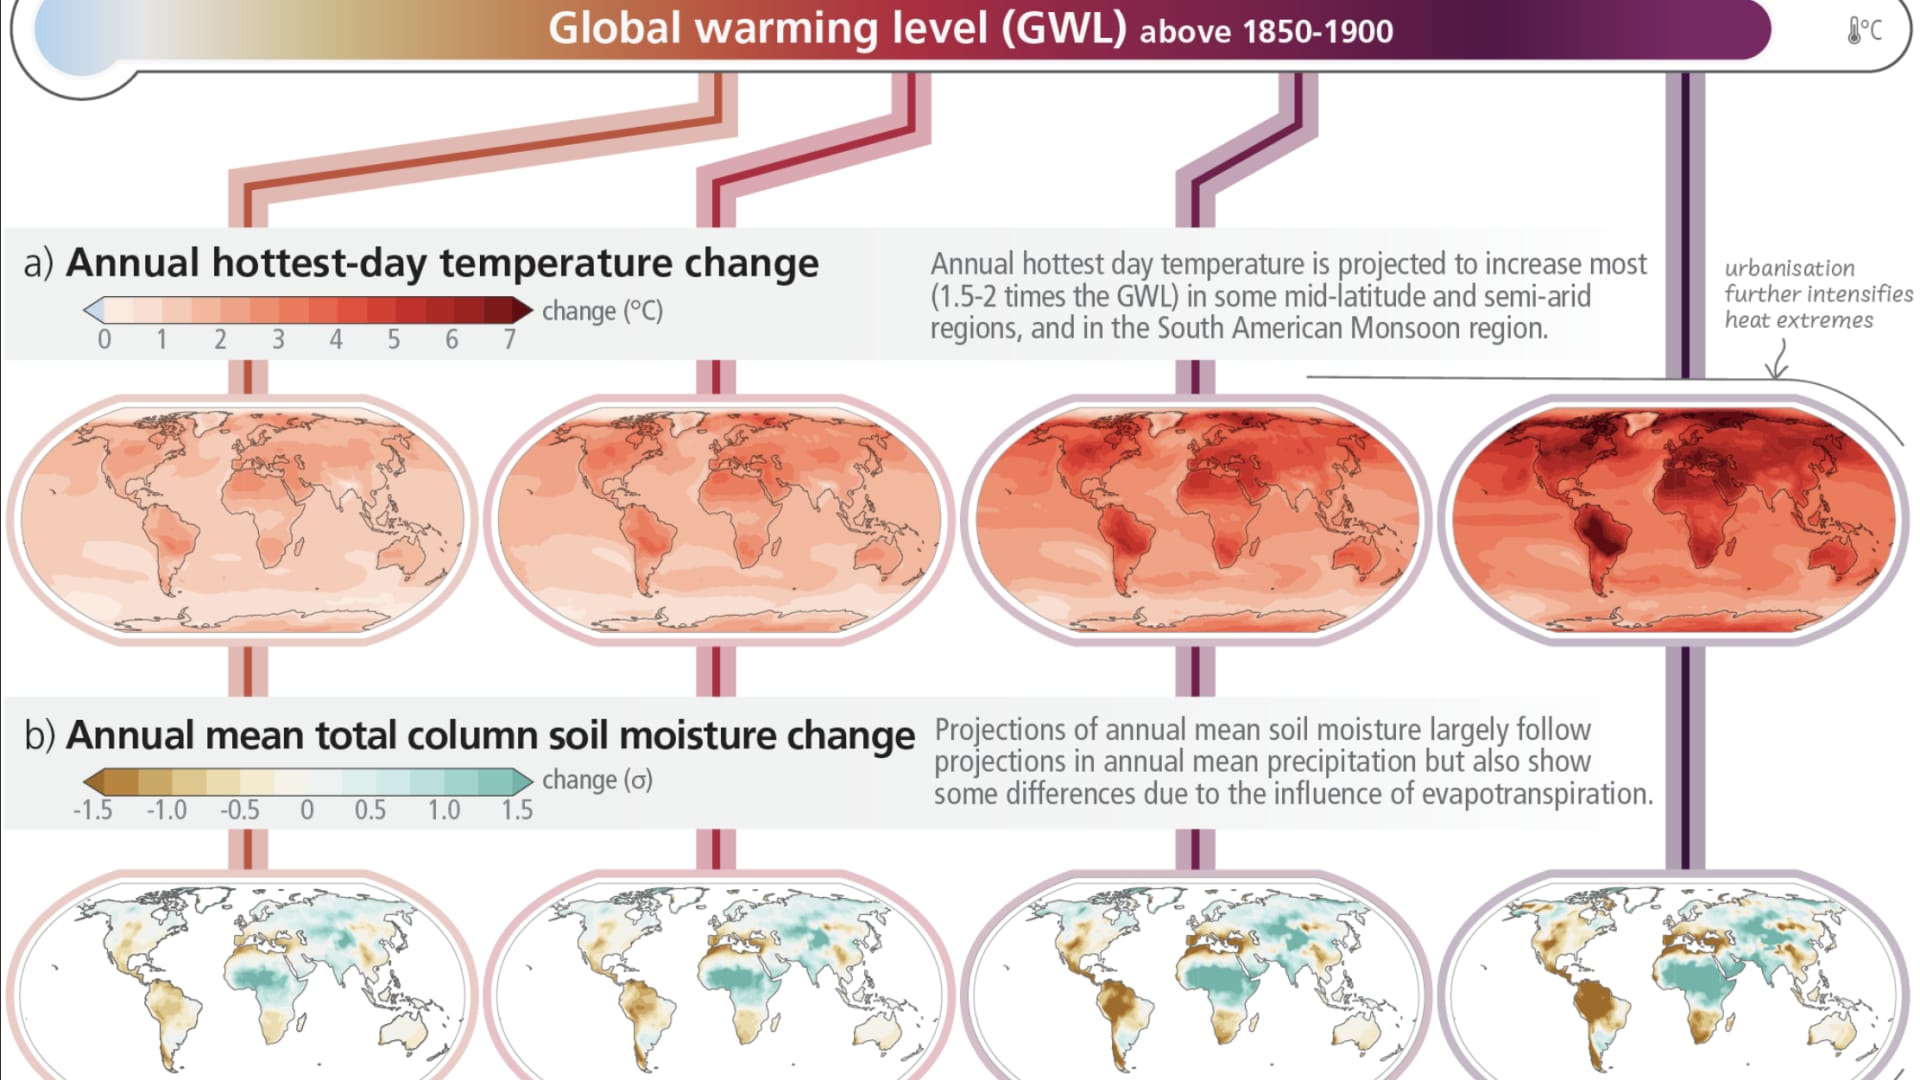 This chart shows the projected changes temperature, soil moisture and precipitation at global warming levels of 1.5°C, 2°C, 3°C, and 4°C relative to baseline levels from the period of 1850–1900. Intergovernmental Panel on Climate Change (IPCC) Sixth Assessment Report